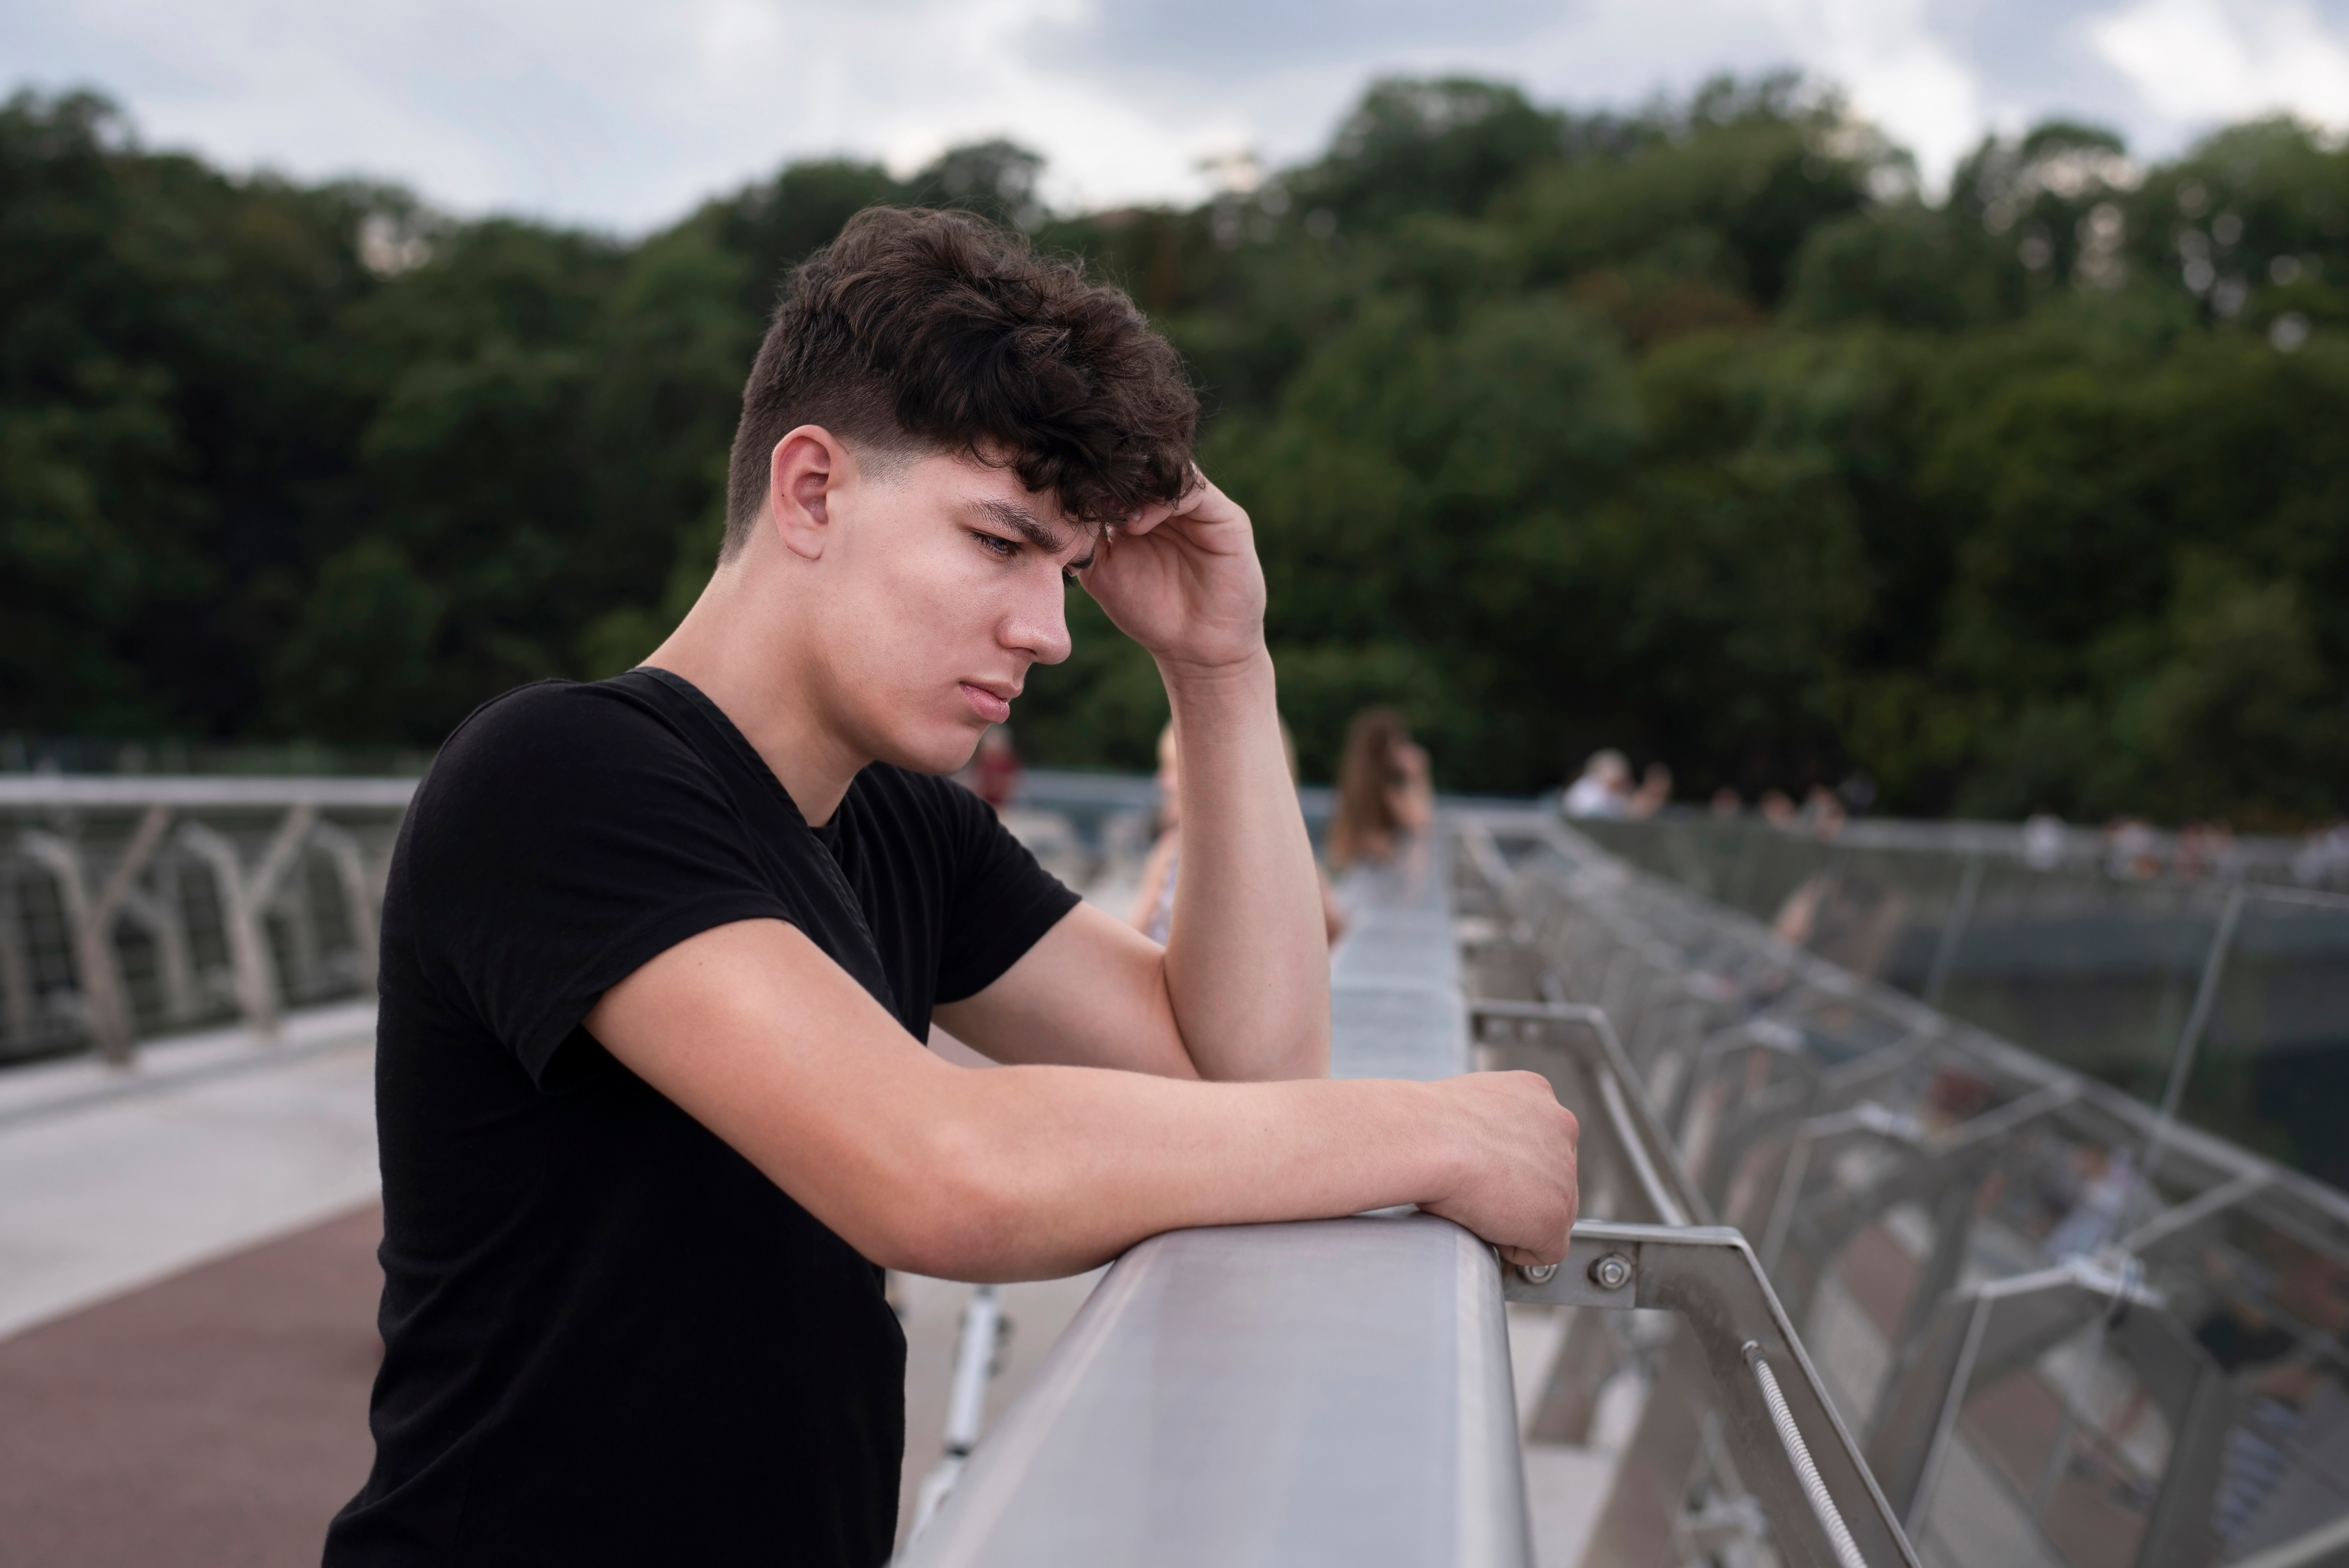 A teenage boy looking sad while standing at a bridge | Source: Shutterstock